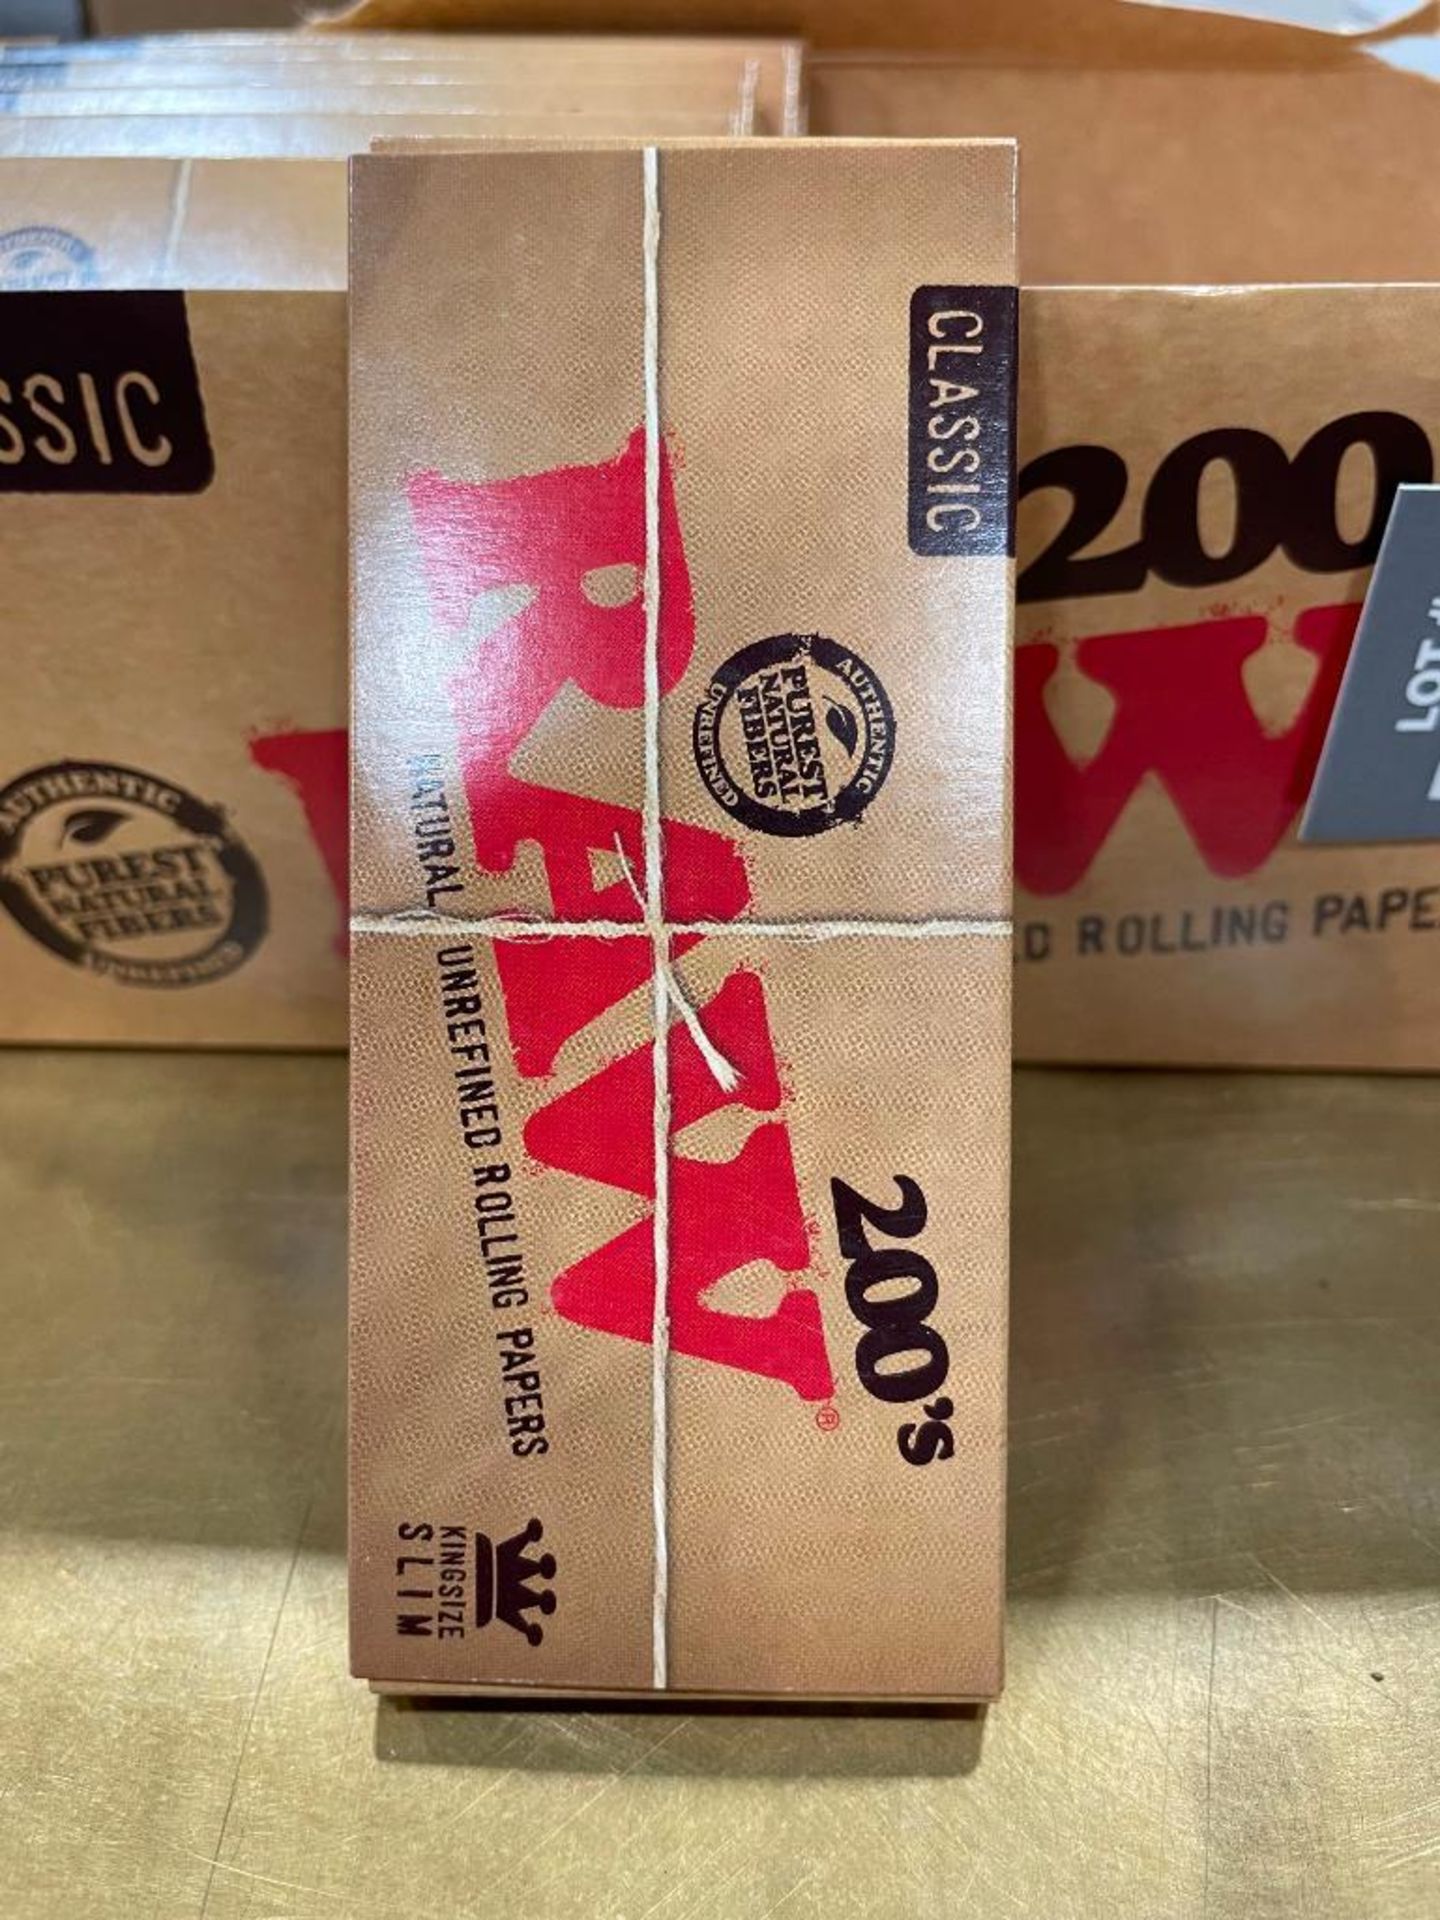 (30) PACKS OF RAW 200s NATURAL UNREFINED ROLLING PAPERS - Image 2 of 4